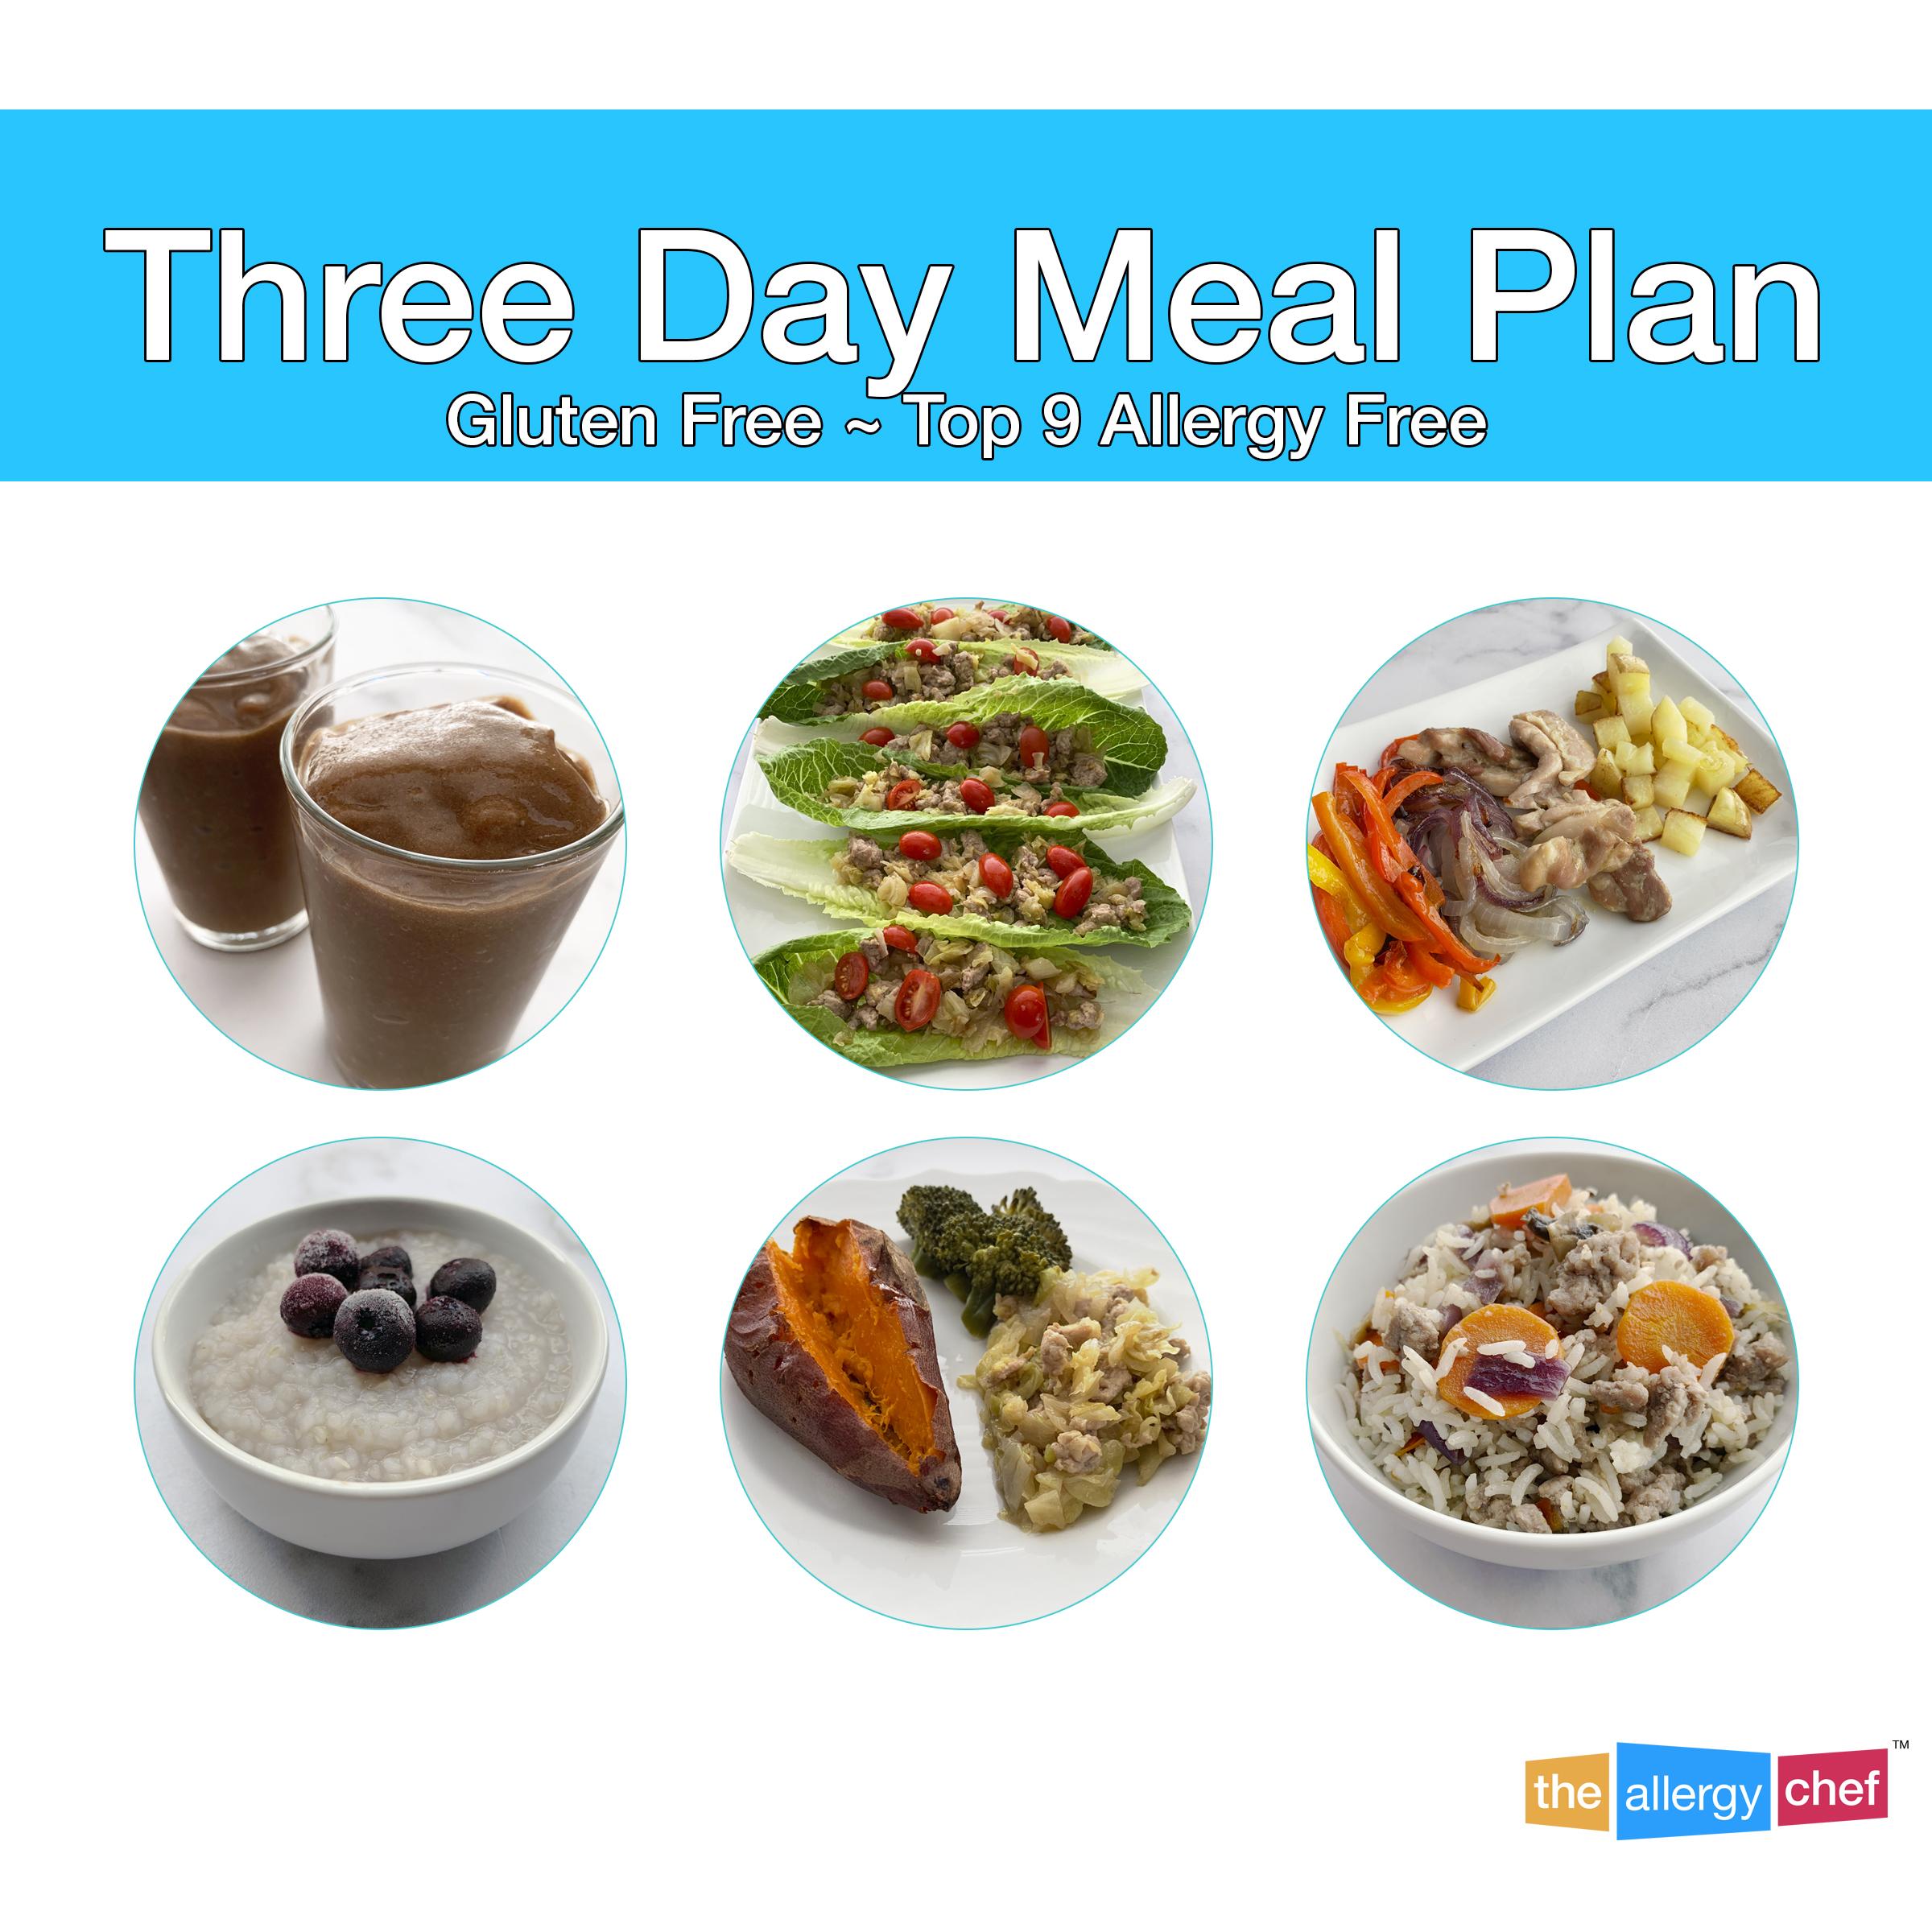 Three Day Meal Plan Cover